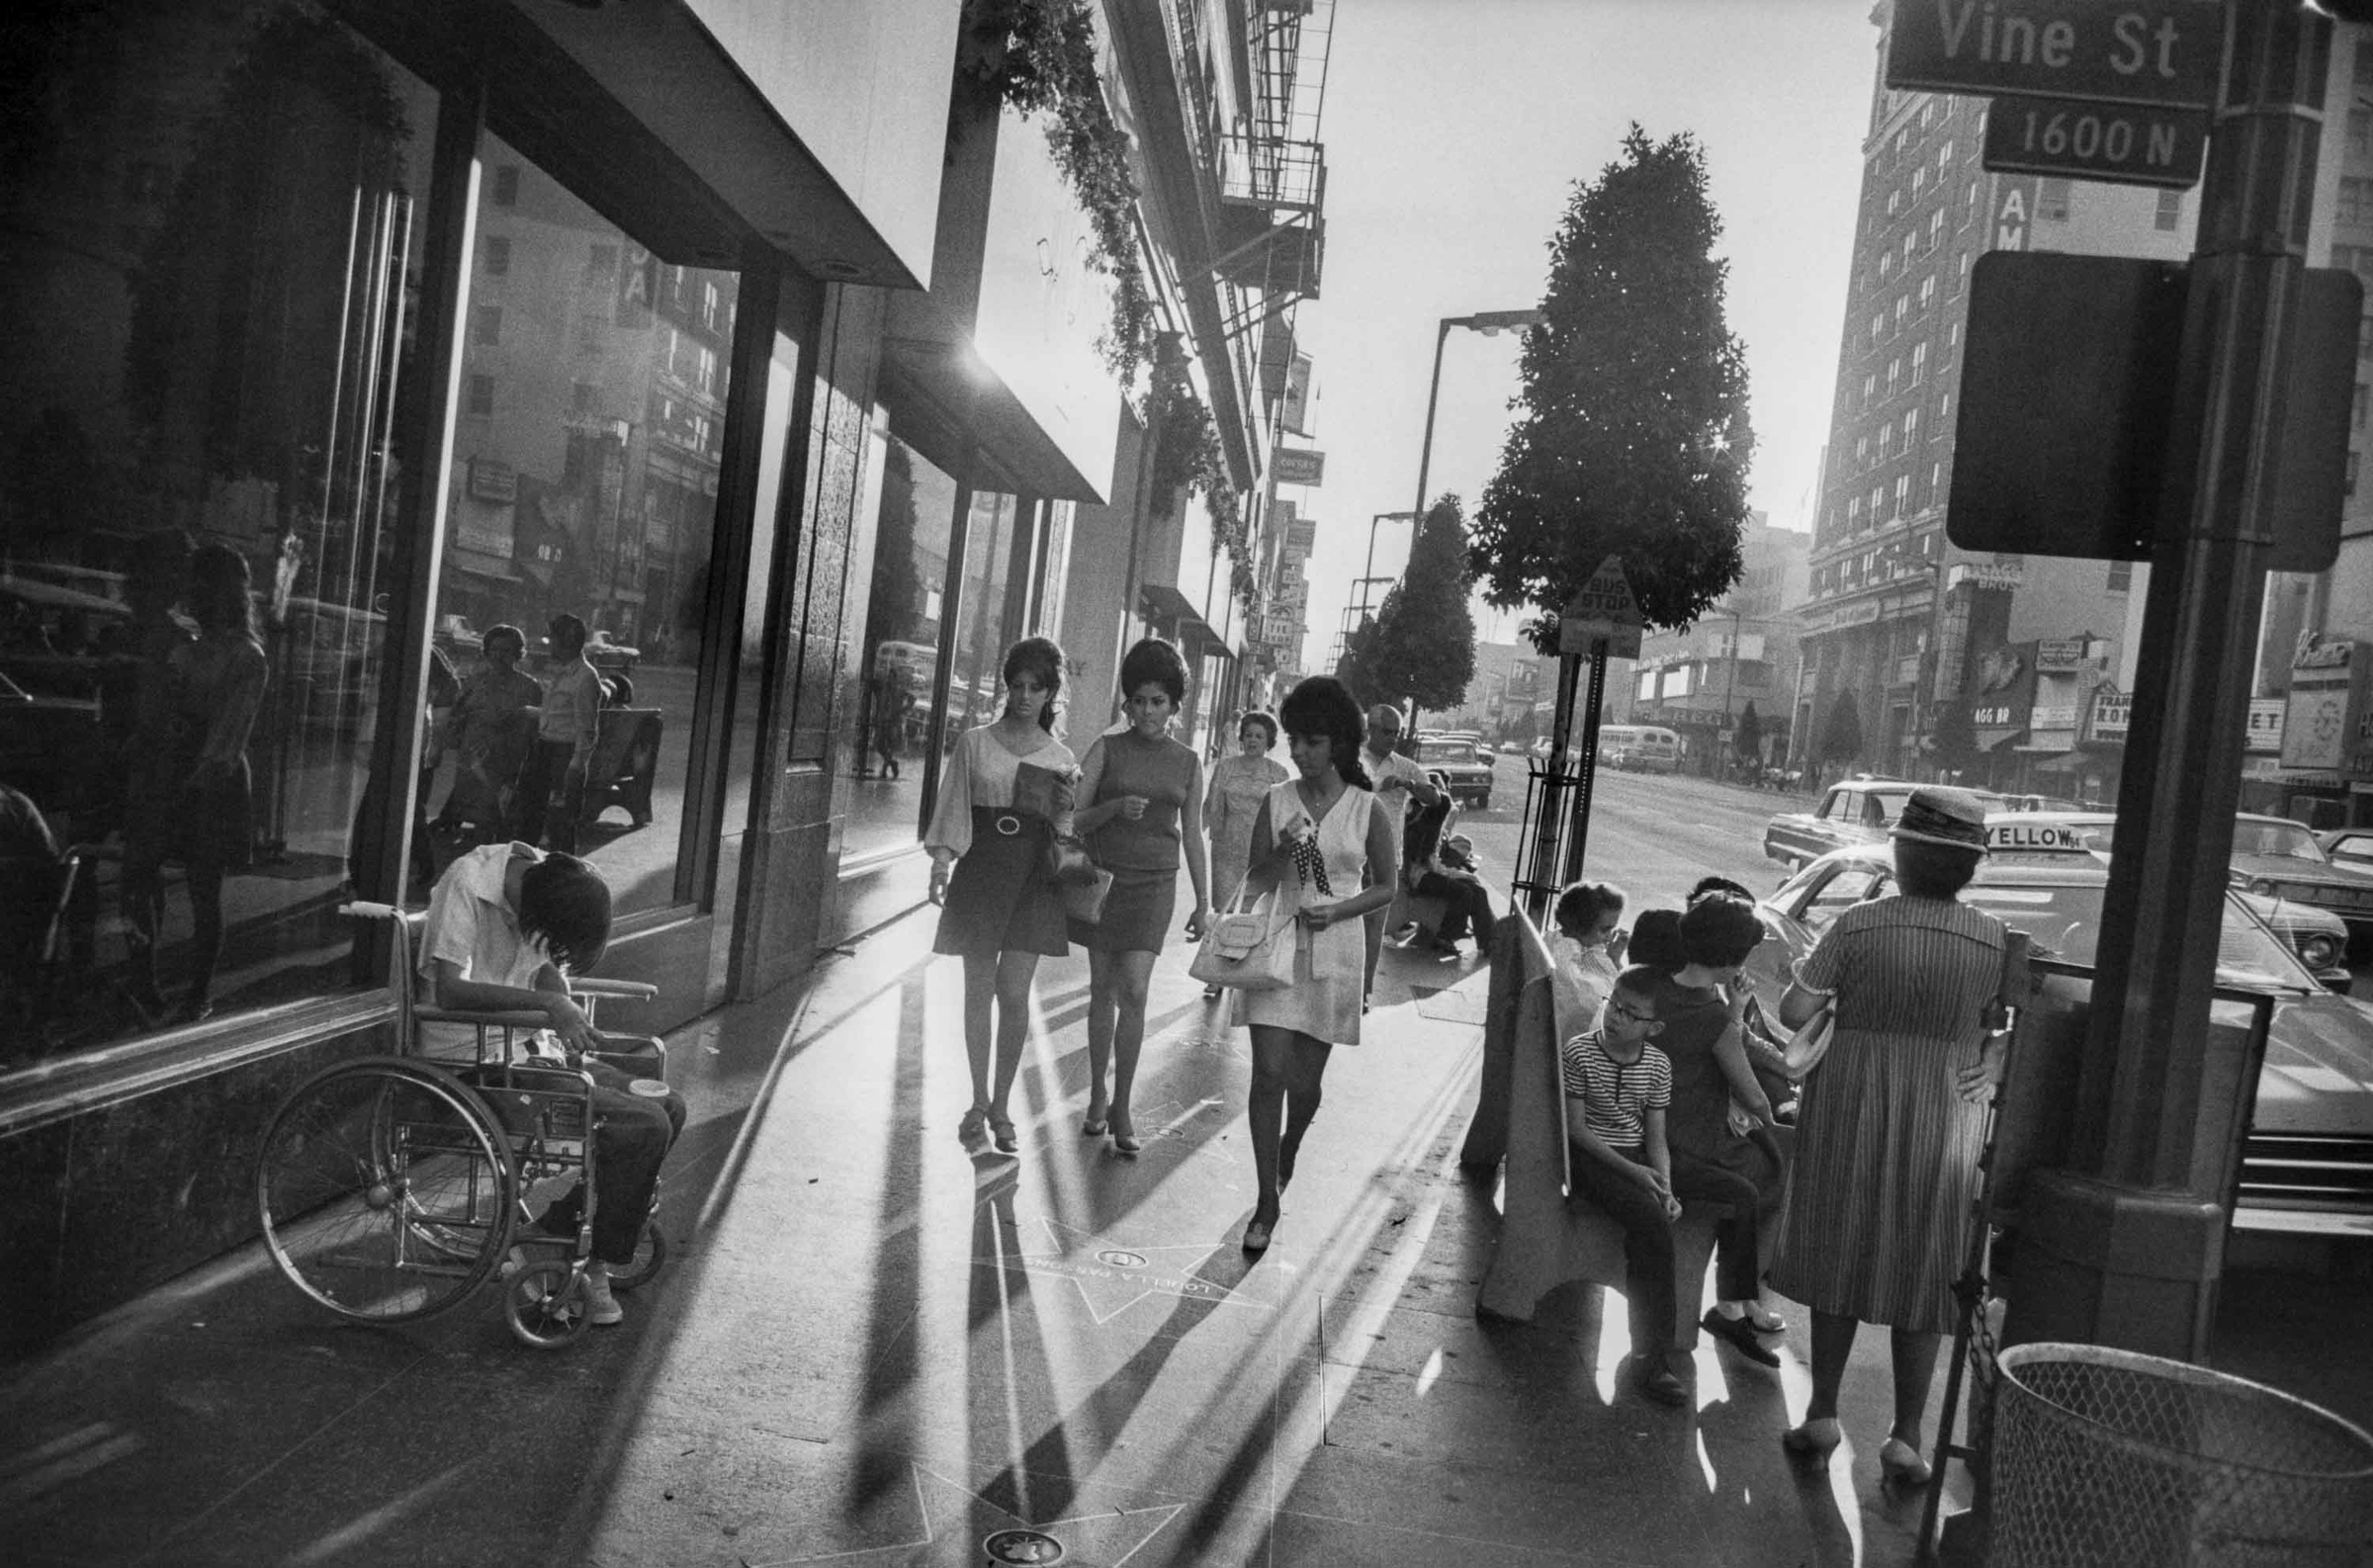 Garry Winogrand, Los Angeles, California, 1969. Gelatin silver print, 21.6 × 32.8 cm. Art Gallery of Ontario, Purchase, with funds generously donated by Martha LA McCain, 2015. © The Estate of Garry Winogrand, courtesy Fraenkel Gallery, San Francisco 2014/1569.11.